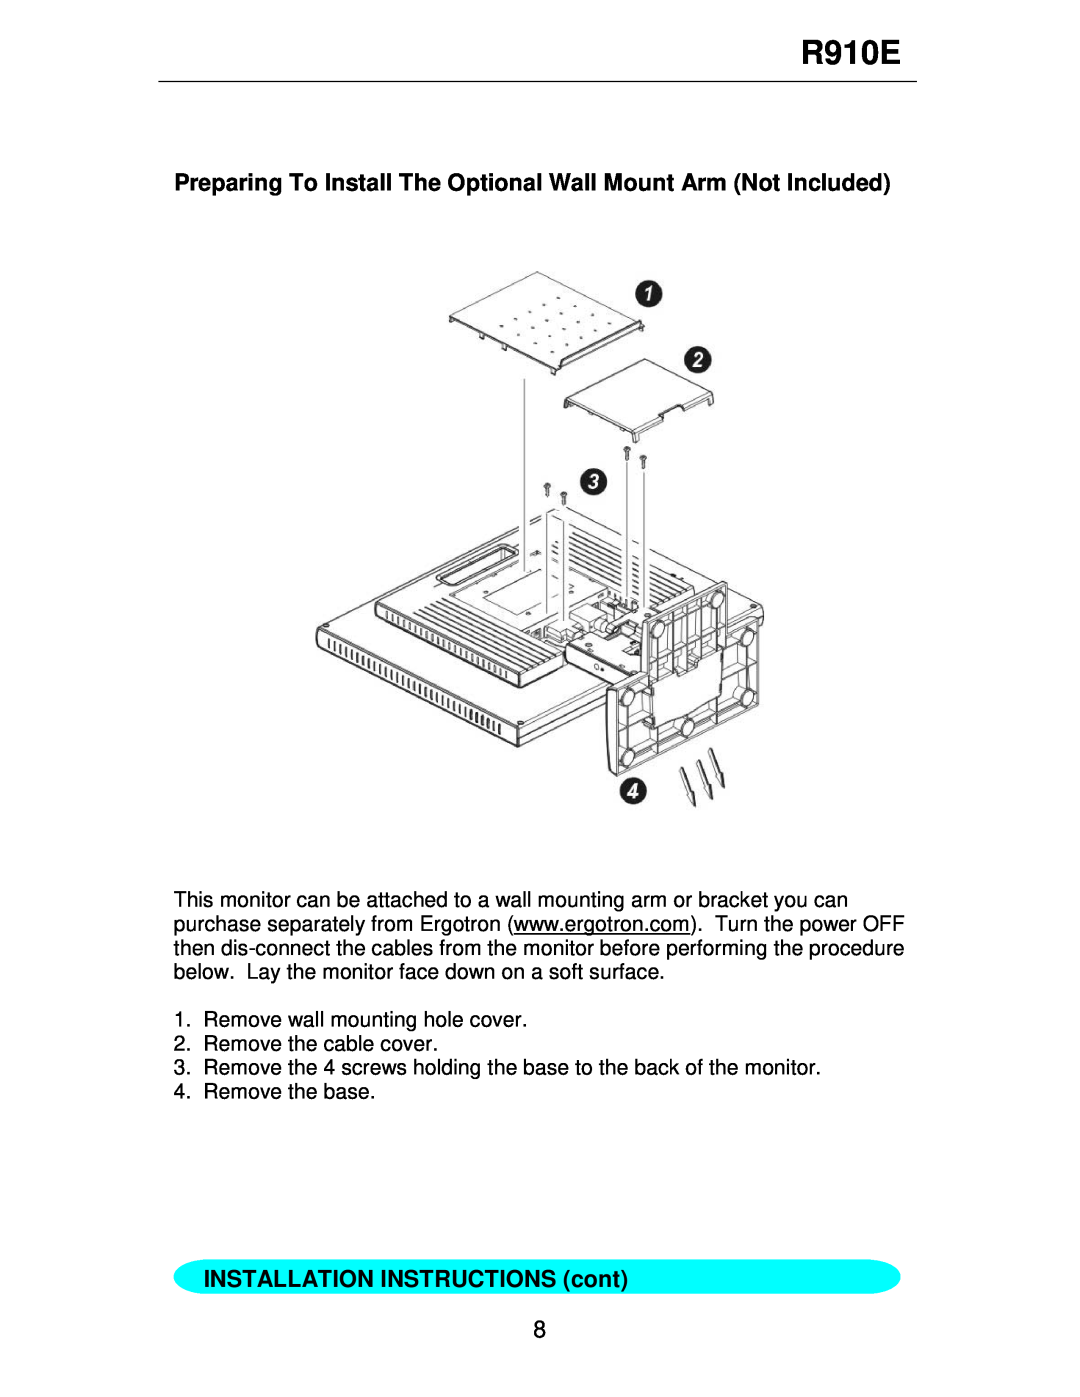 Rosewill R910E user manual Preparing To Install The Optional Wall Mount Arm Not Included, INSTALLATION INSTRUCTIONS cont 